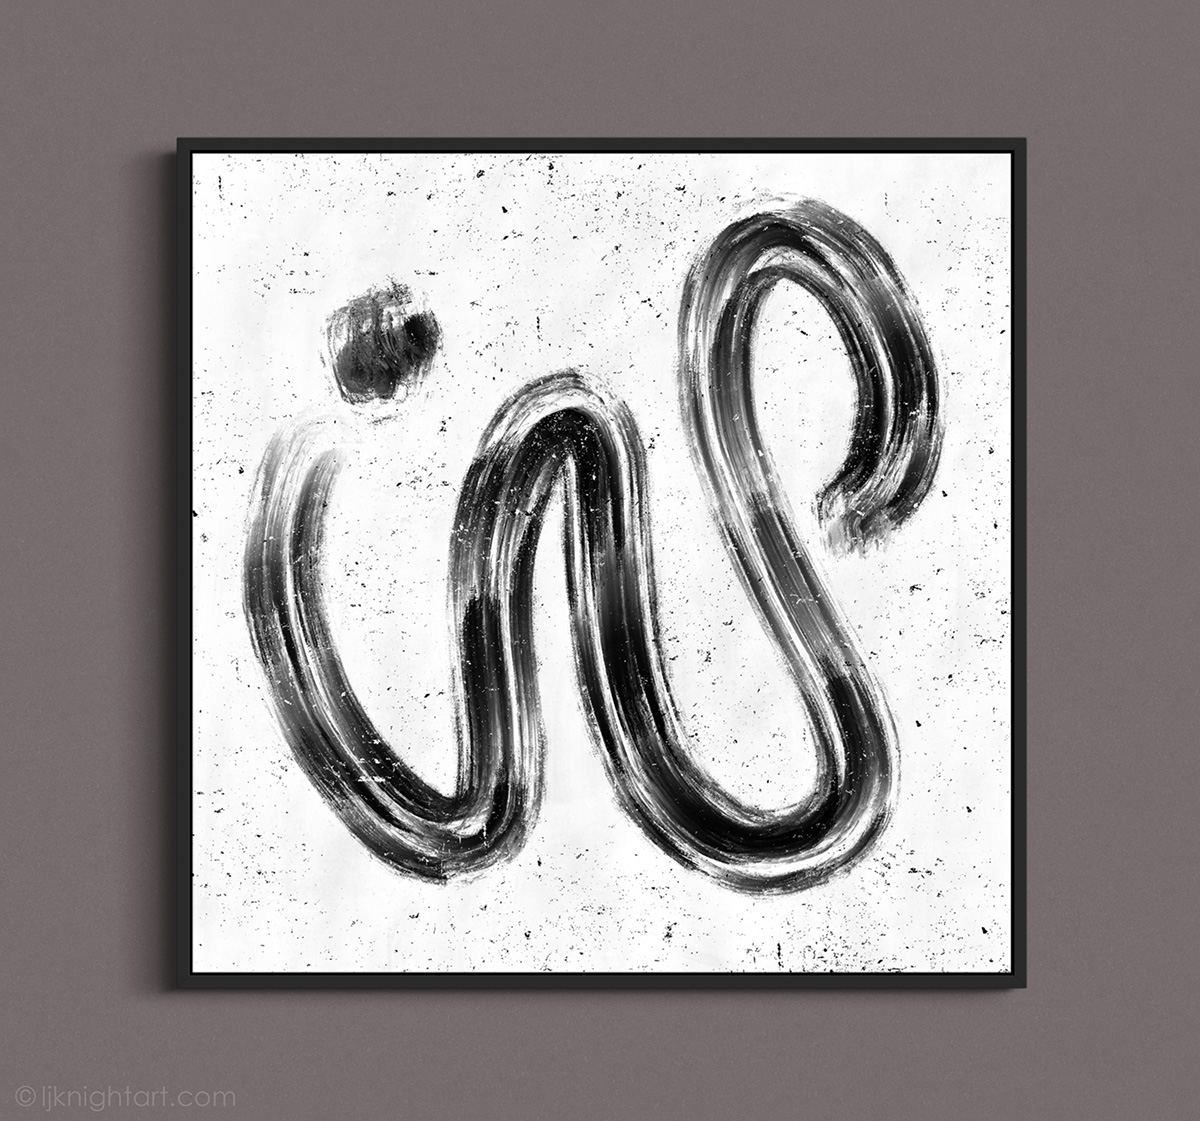 Bold Black Brush Stroke Monochrome Abstract Painting - minimalist digital painting featuring a bold brush stroke on a light textured background, by L.J. Knight